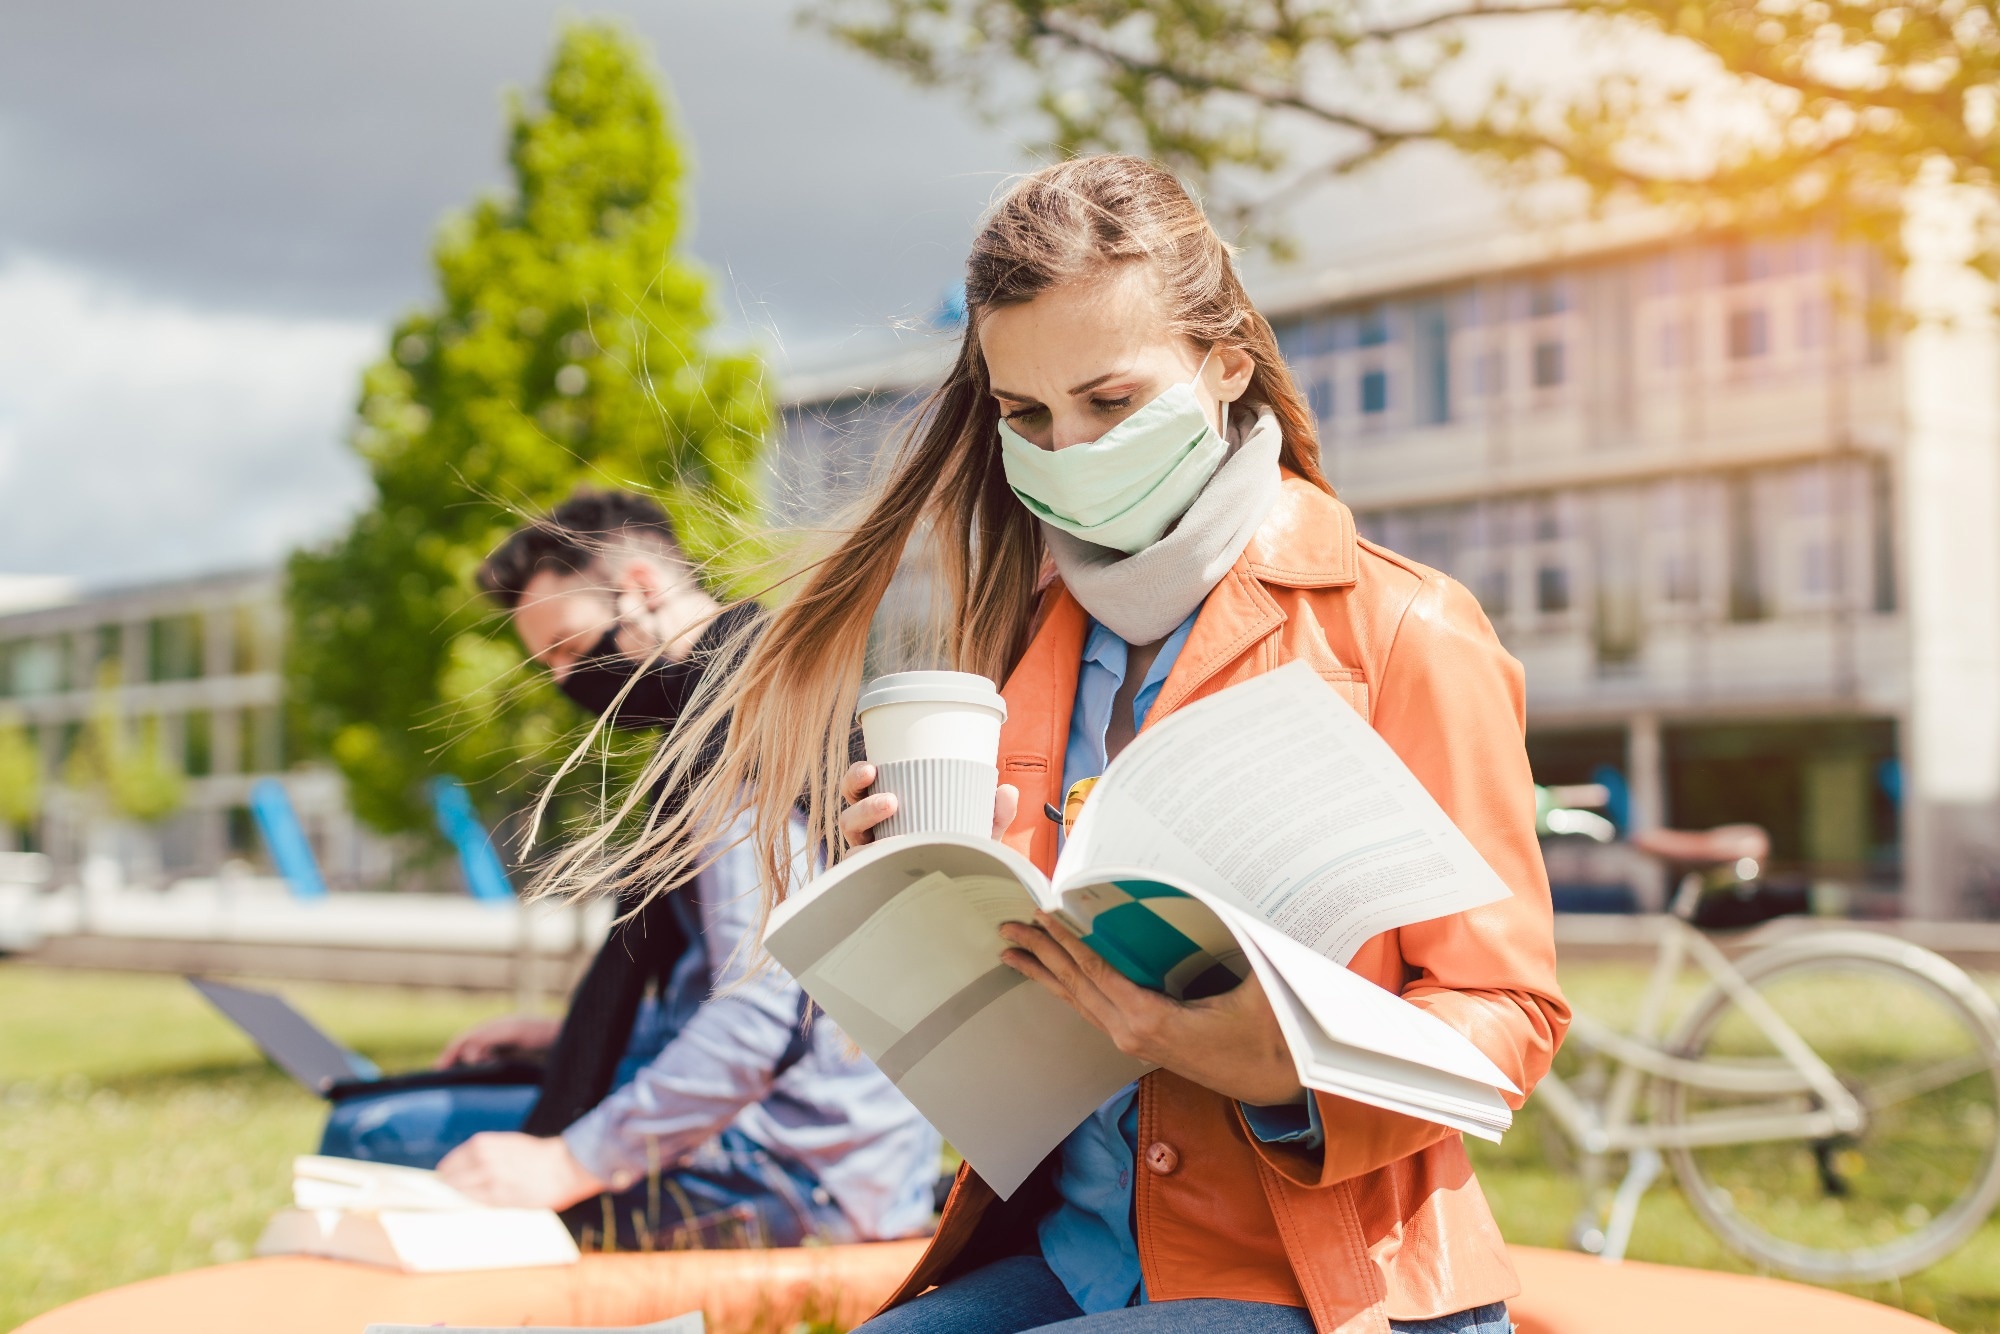 Study: Mental Health Symptoms of University Students 15 Months After the Onset of the COVID-19 Pandemic in France. Image Credit: Kzenon/Shutterstock